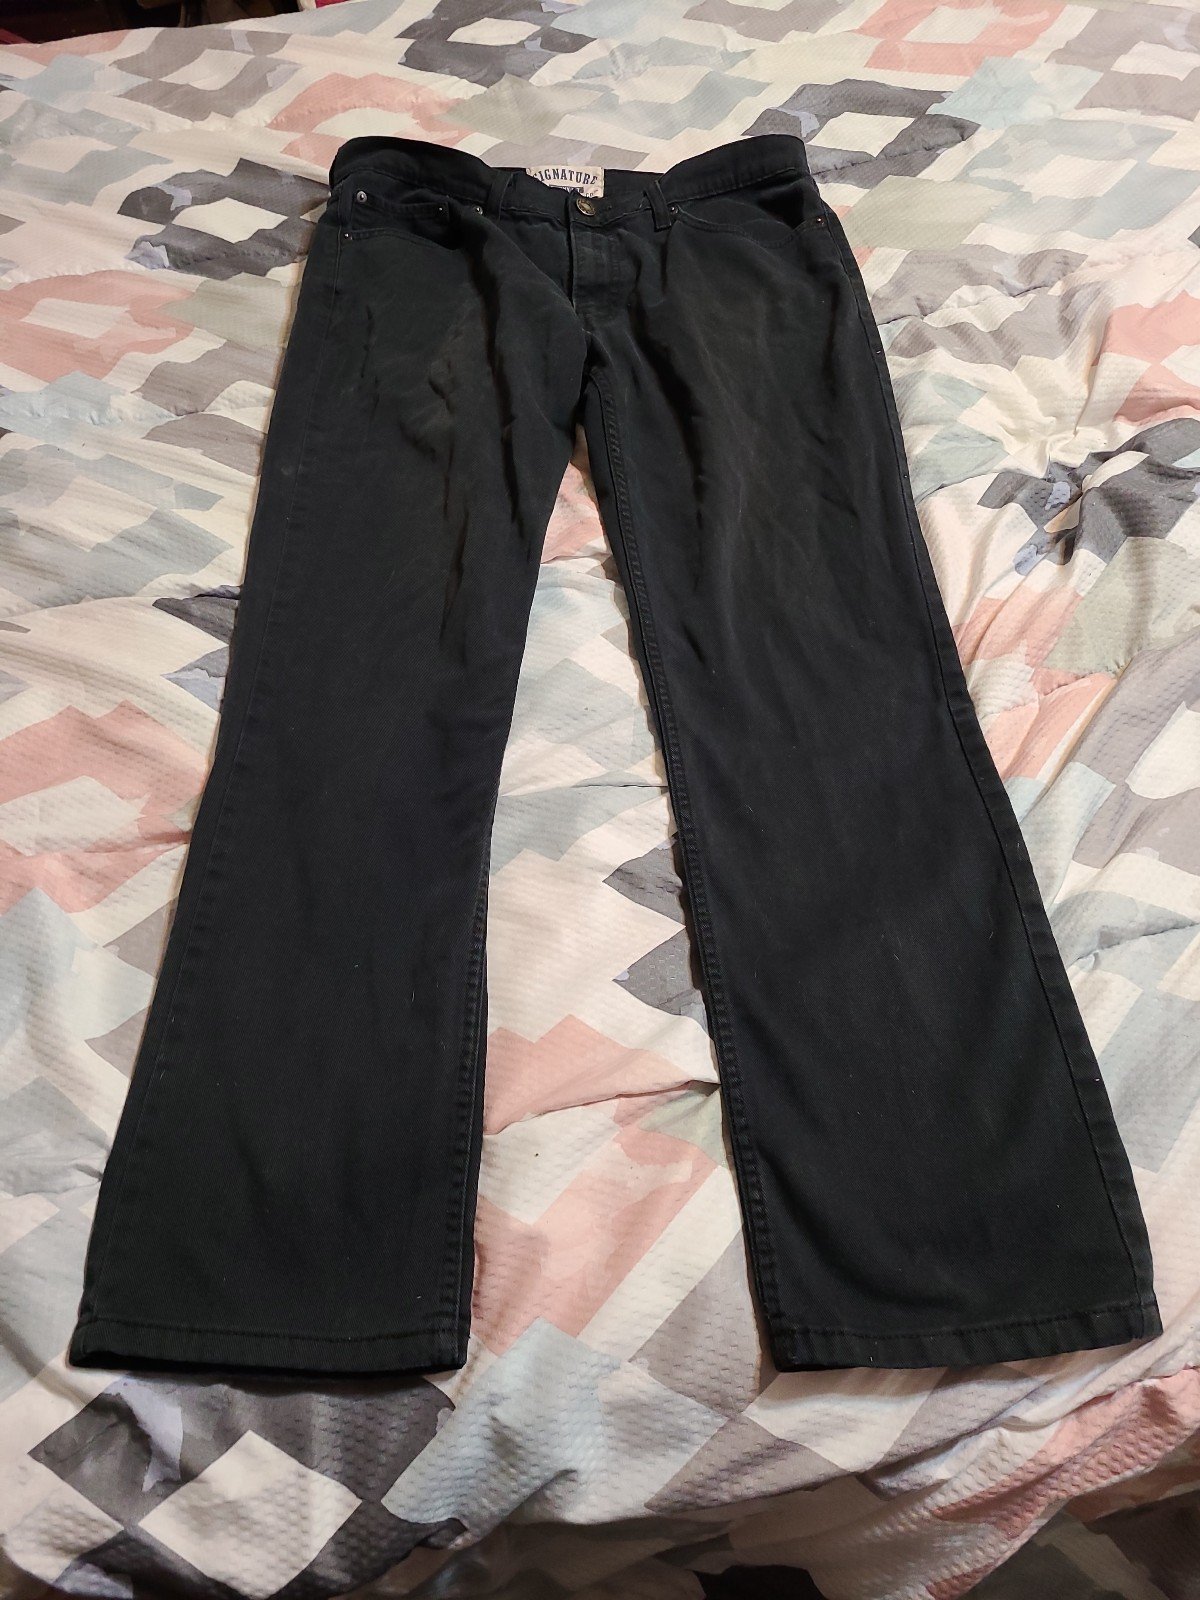 Discounted Signiture skinny black jeans w.36 L-32. See pictures for details on measurements laB0JoI1U Zero Profit 